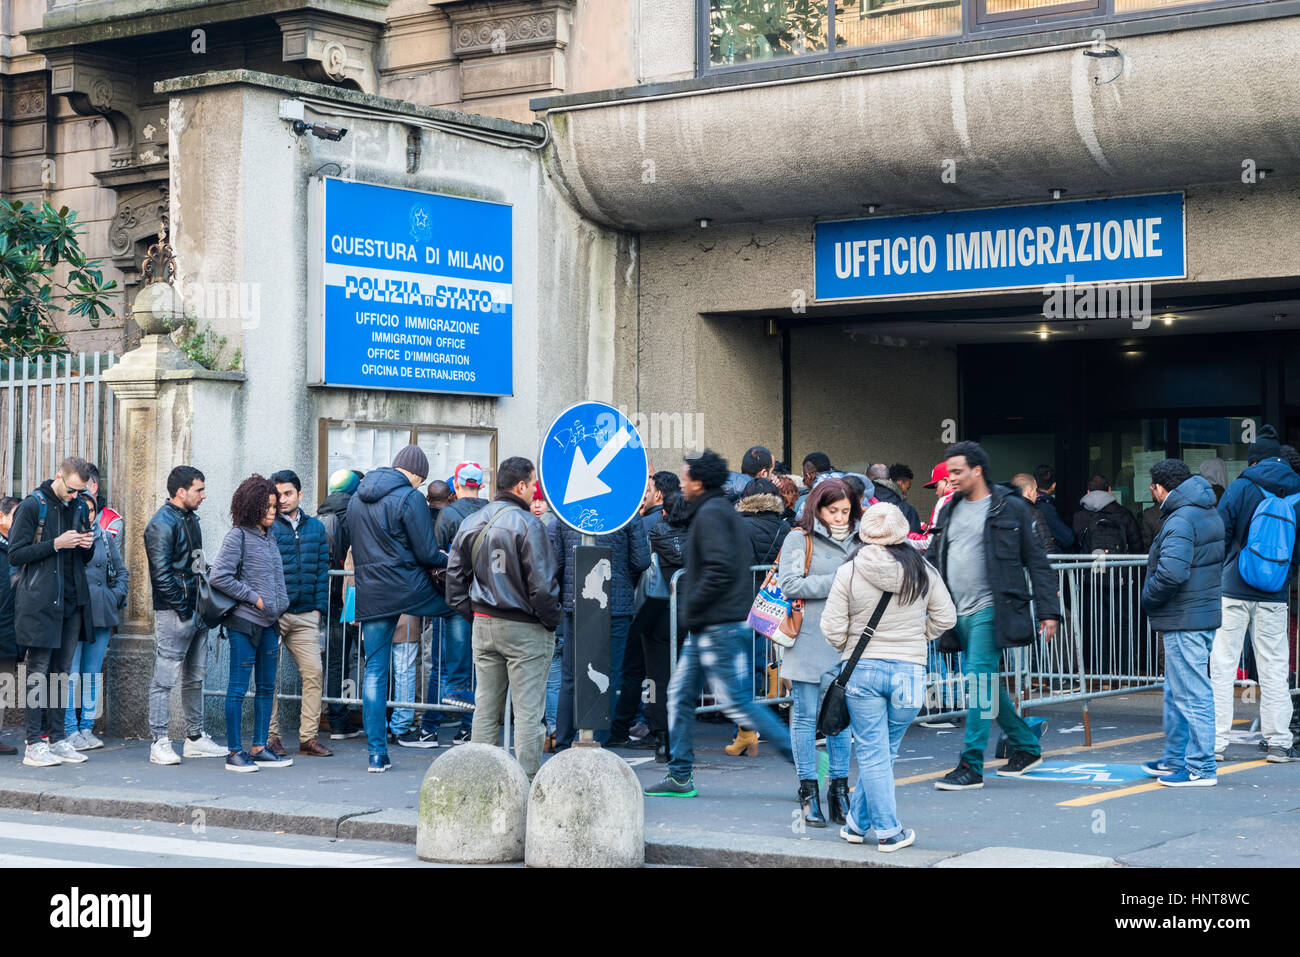 Milan, Italy. 17th Feb, 2017. A queue for the Immigration Office in Milan, Italy. Italy is facing a refugee crisis due to ongoing wars in North Africa and the Middle East Credit: Alexandre Rotenberg/Alamy Live News Stock Photo